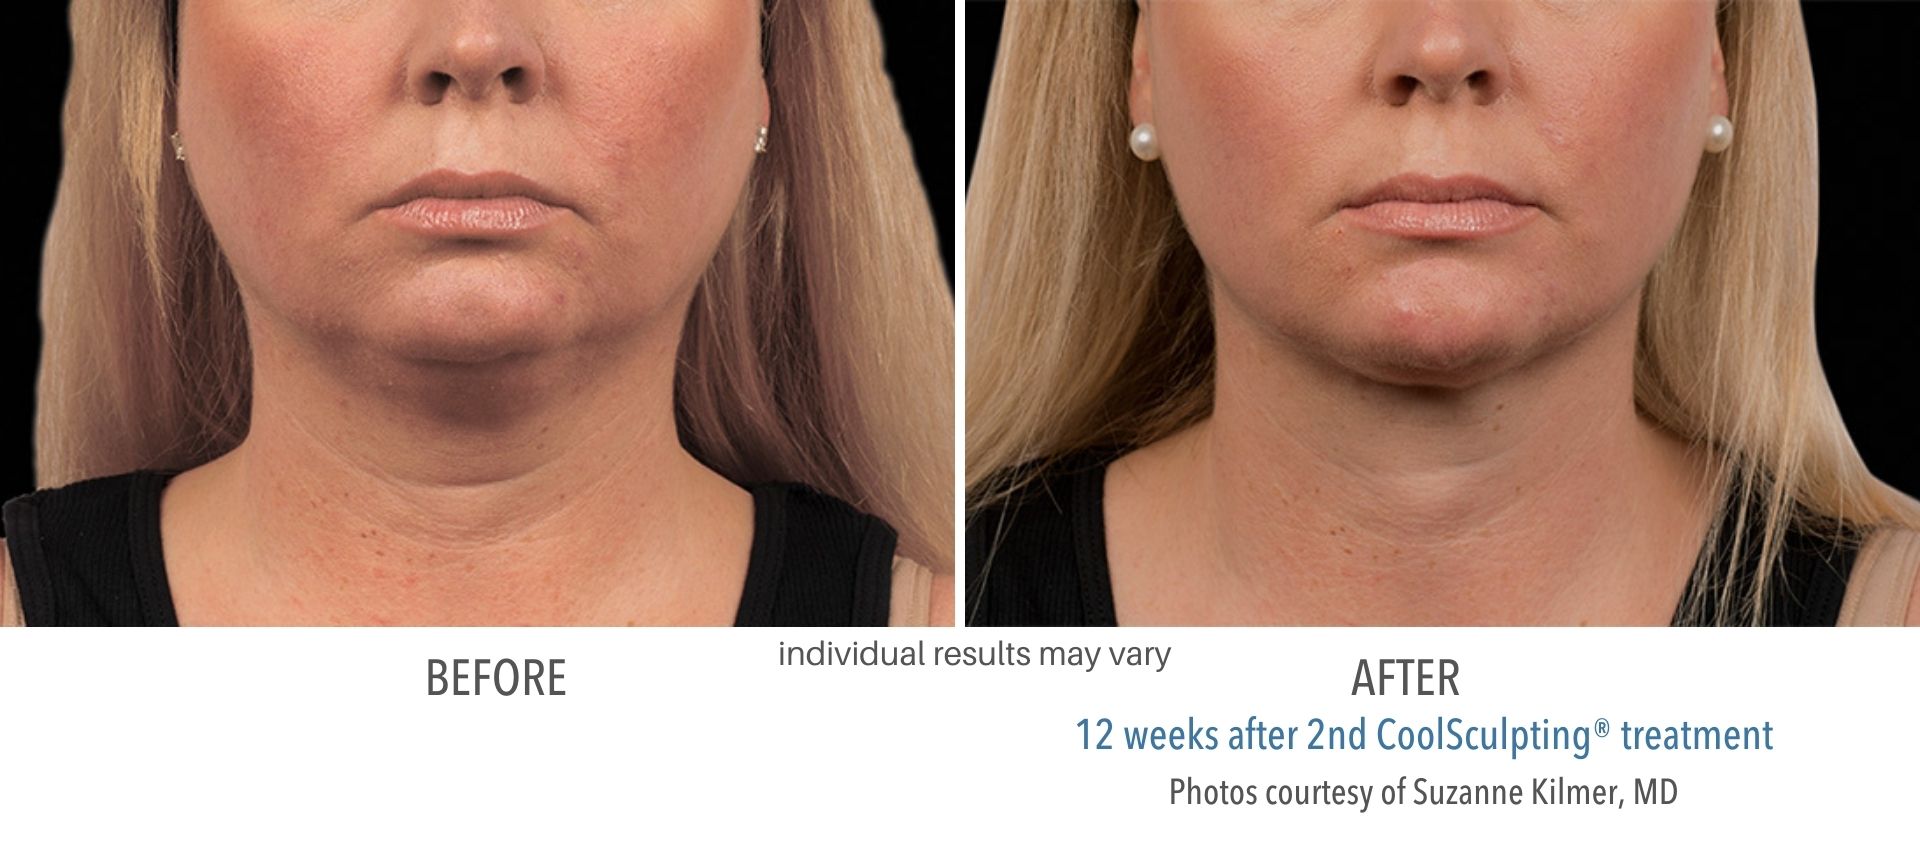 Coolsculpting treatment double chin before and after results provided by Skin Suite RX.